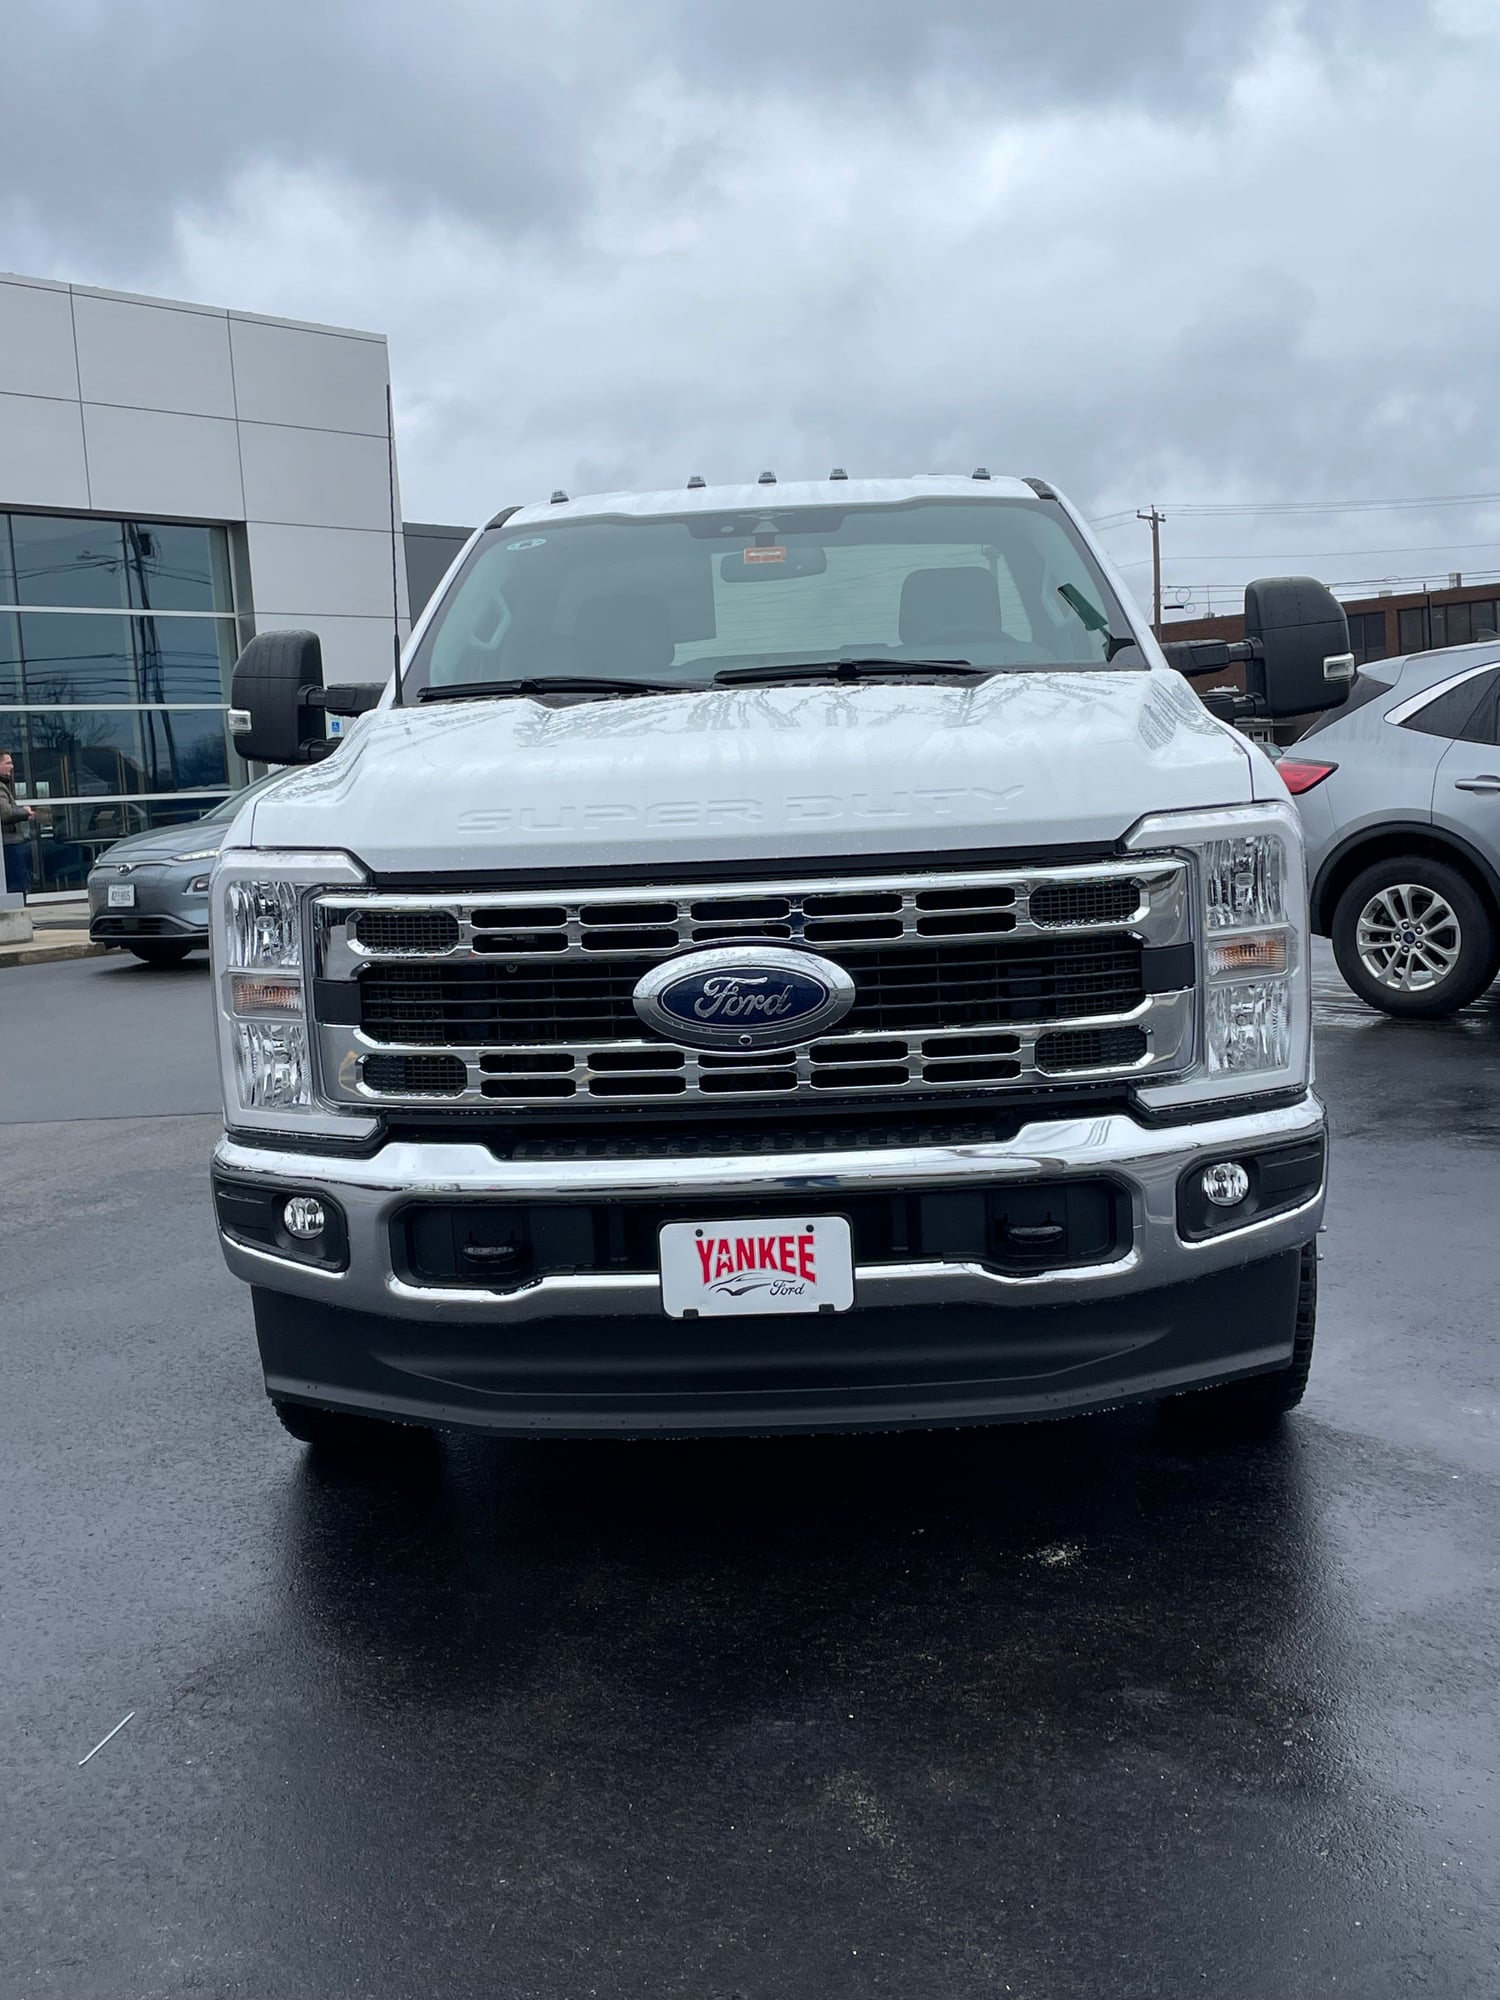 2023 Ford F-350 - Selling the boat so I’m selling the truck….like new 2023 F350 XLT... - Used - VIN 1FTRF3DN6PEC18163 - 3,000 Miles - 8 cyl - 4WD - Automatic - Truck - White - South Portland, ME 04106, United States